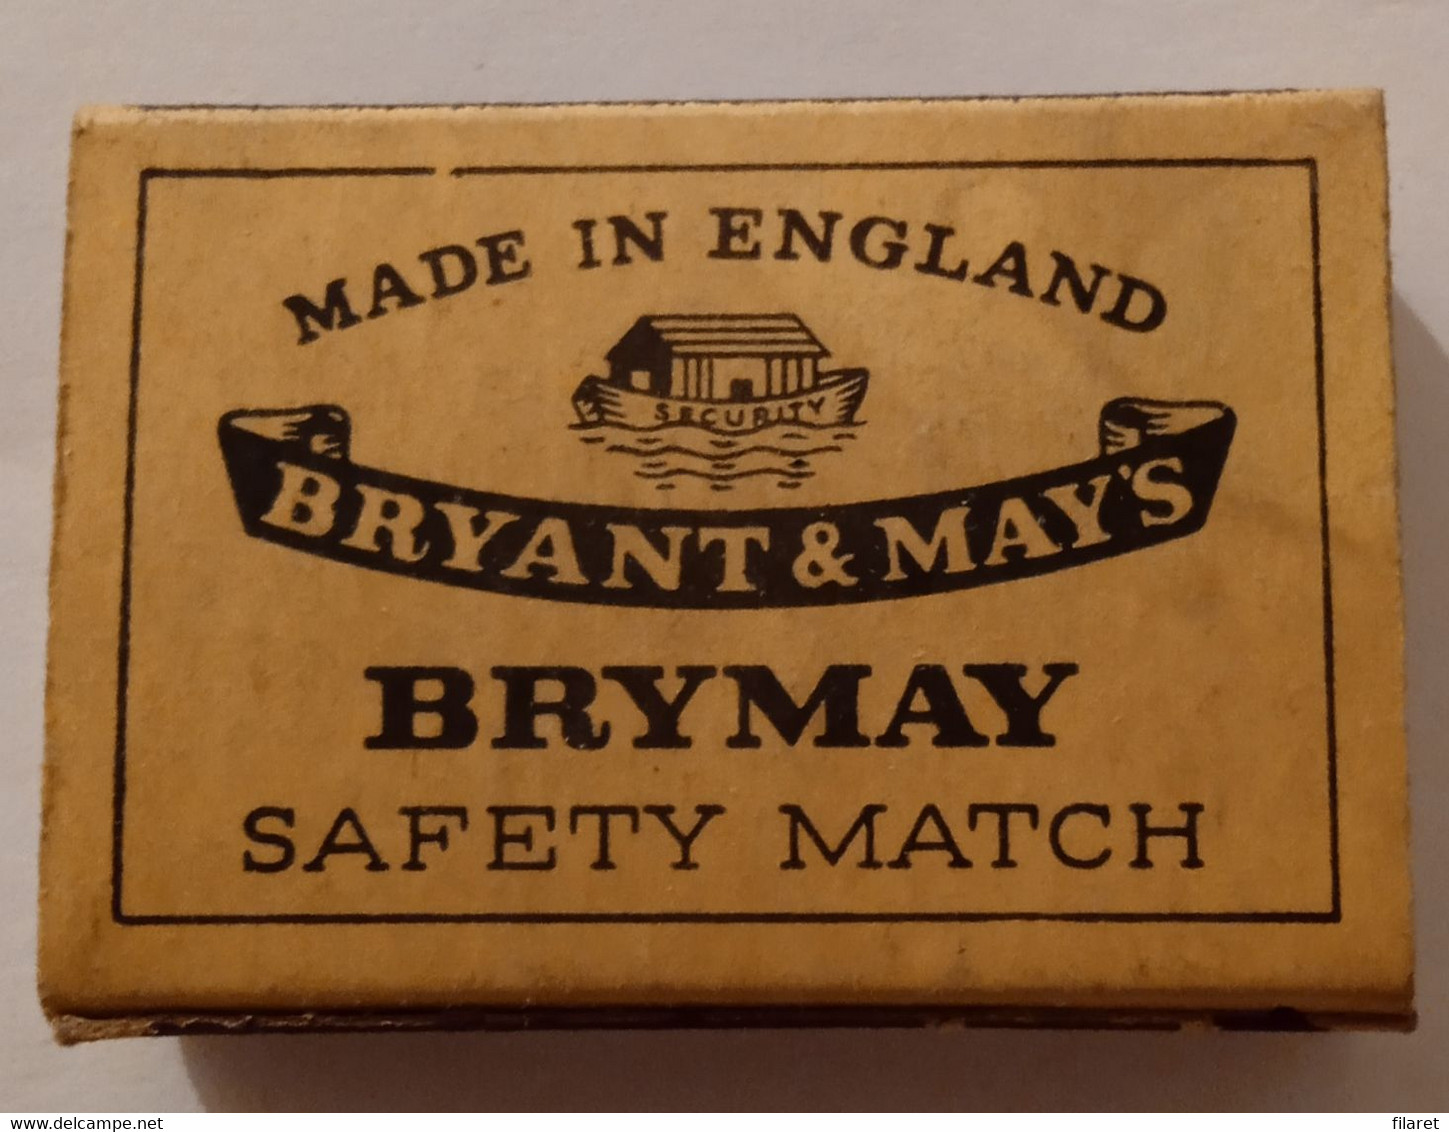 ENGLAND GLORY,BRYANT & MAY'S,OLD MATCHBOXE - Boites D'allumettes